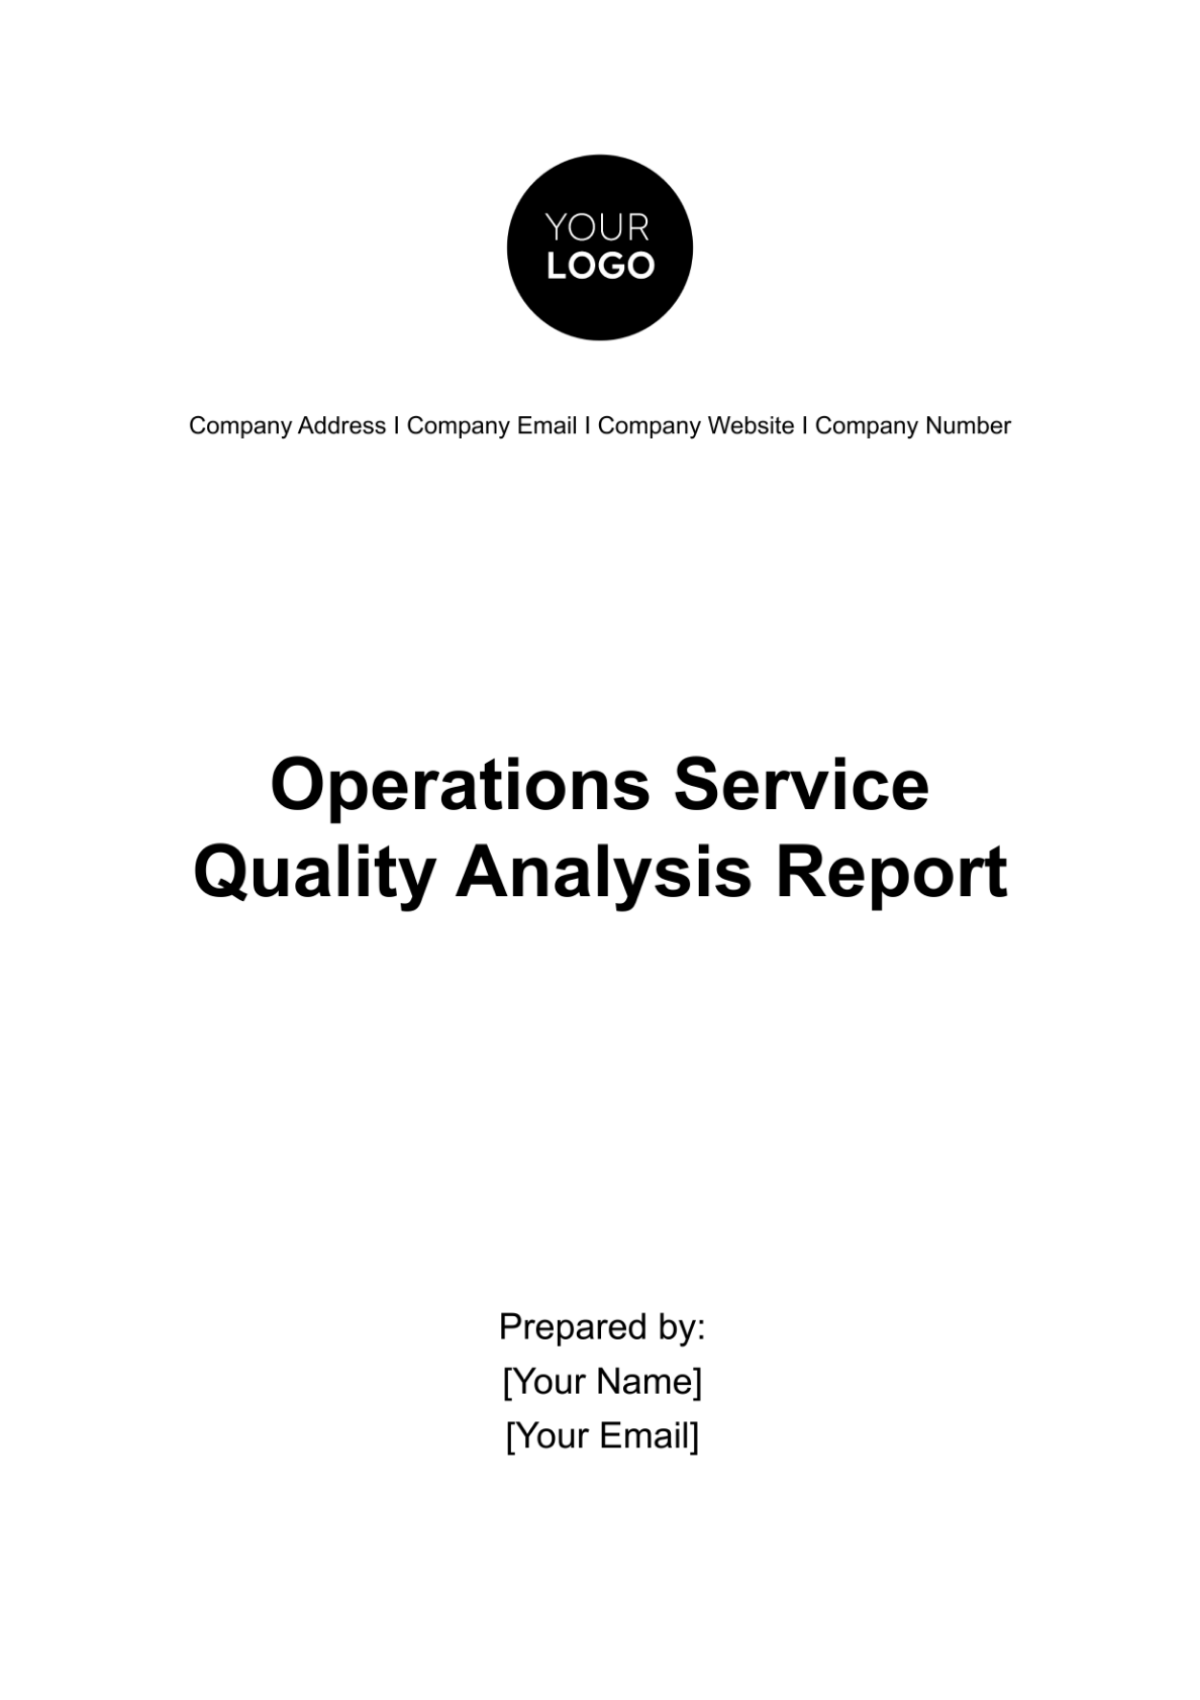 Operations Service Quality Analysis Report Template